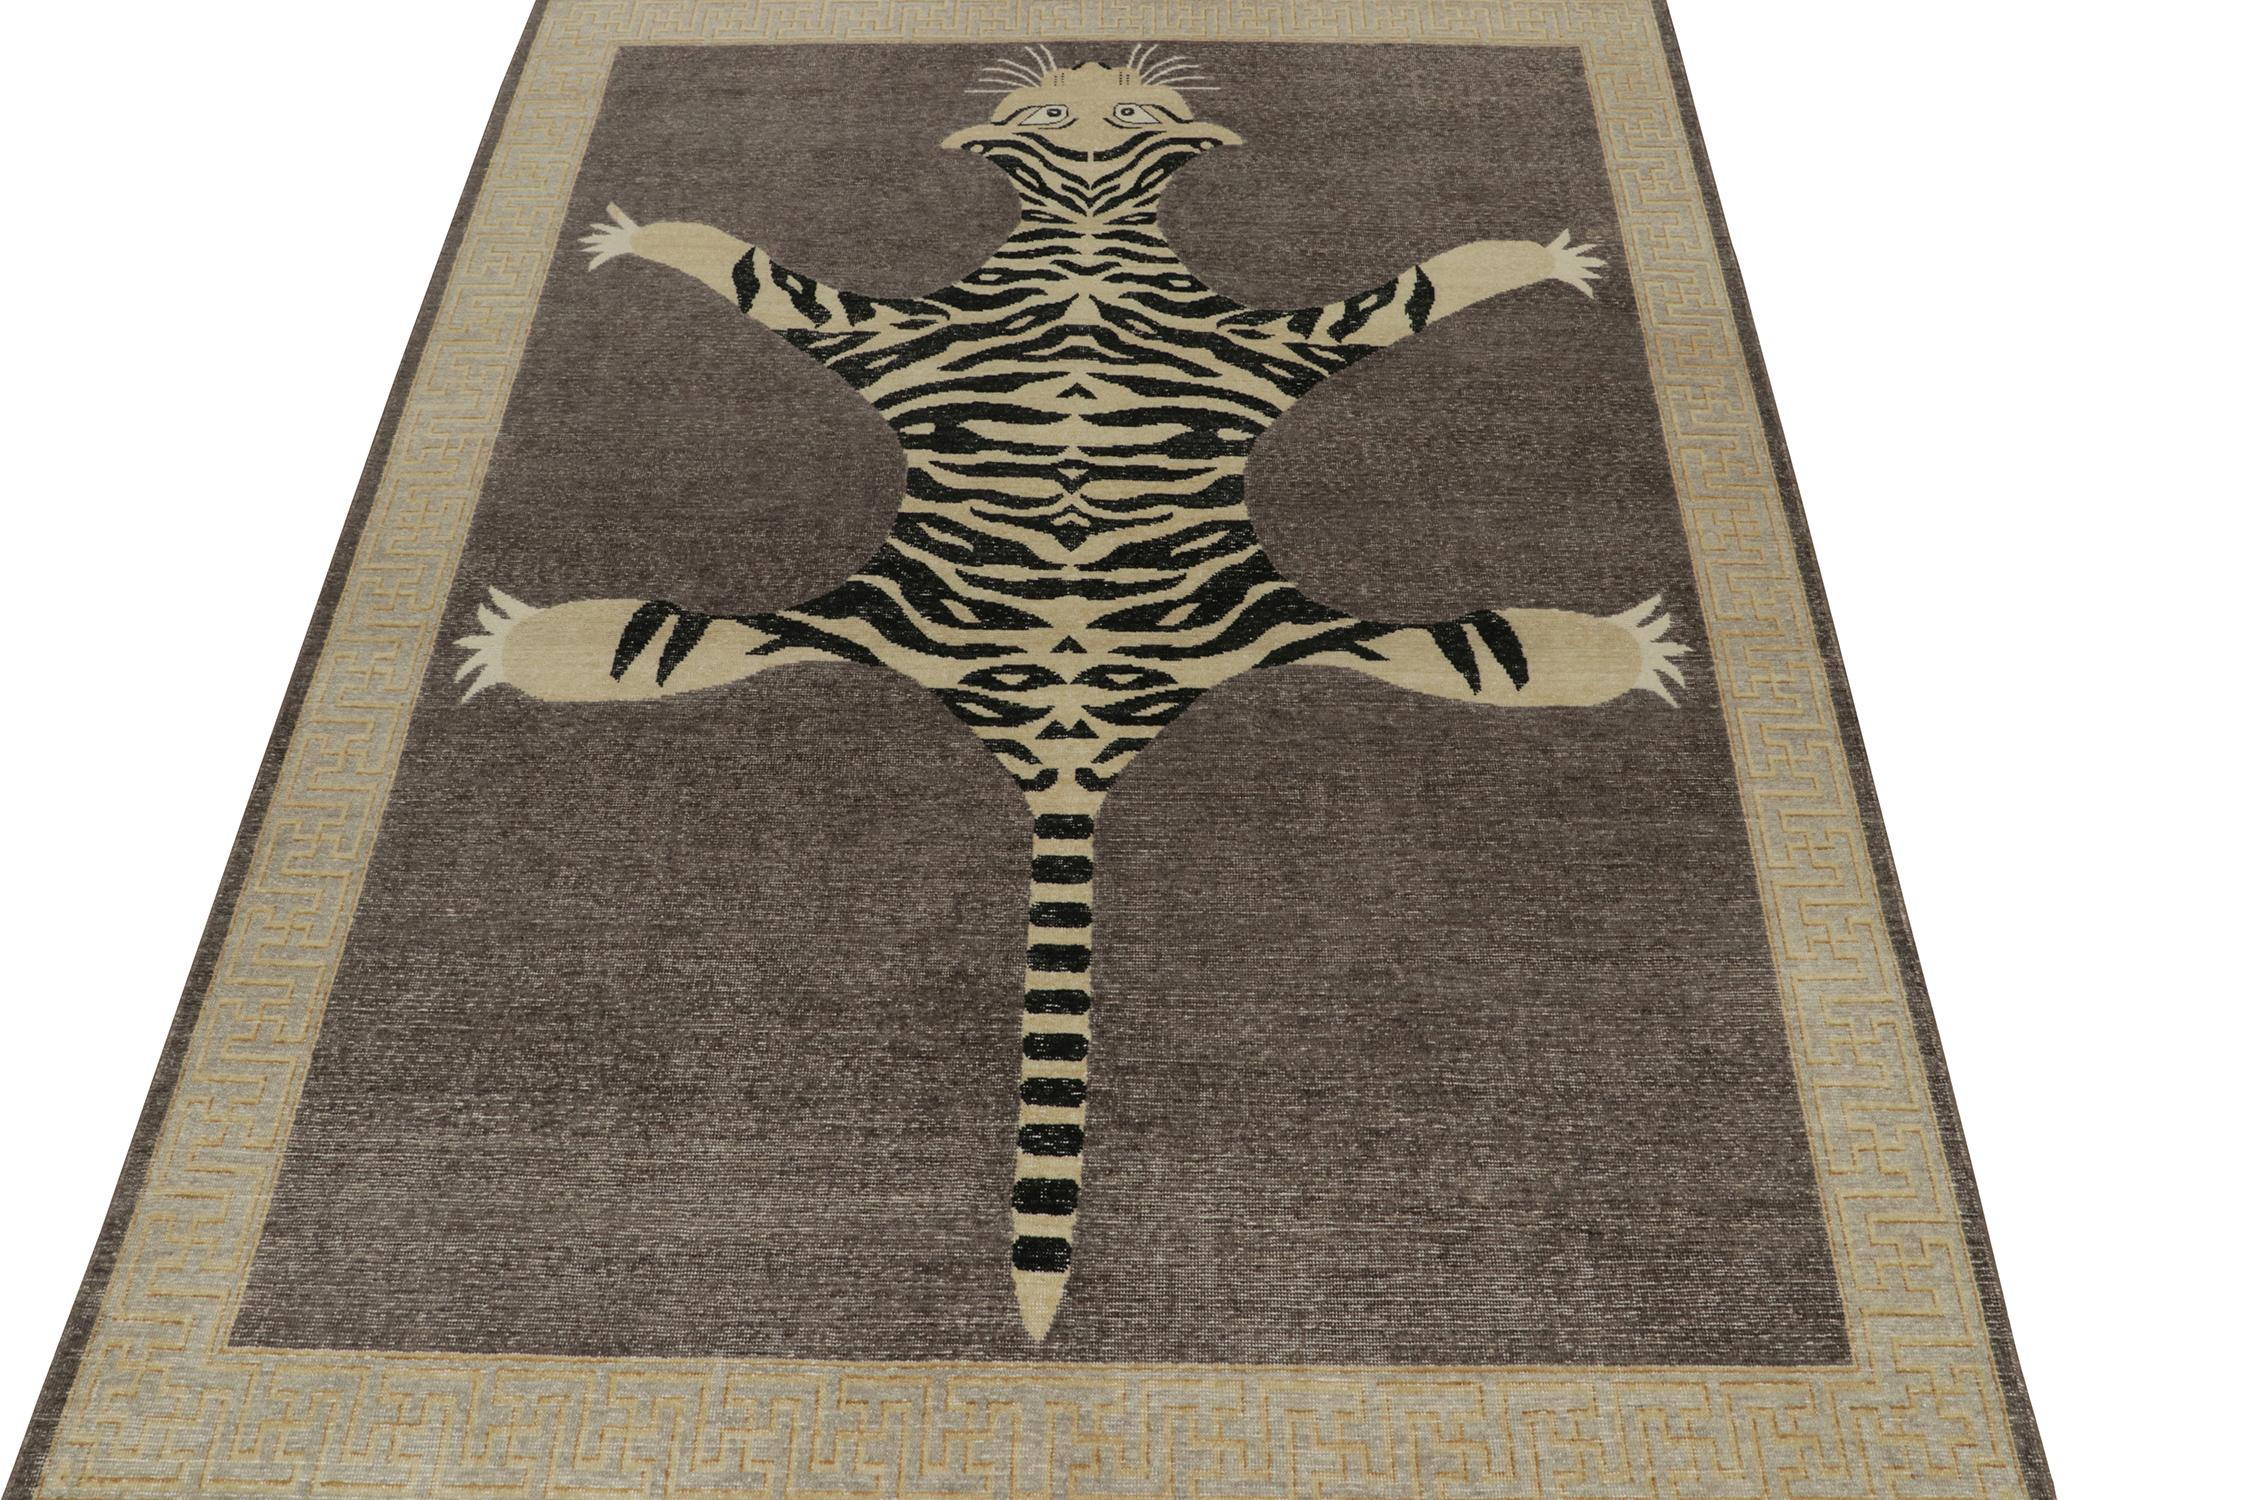 Indian Rug & Kilim’s Distressed Style Tiger Skin Rug in Gray, Beige and Black Pictorial For Sale